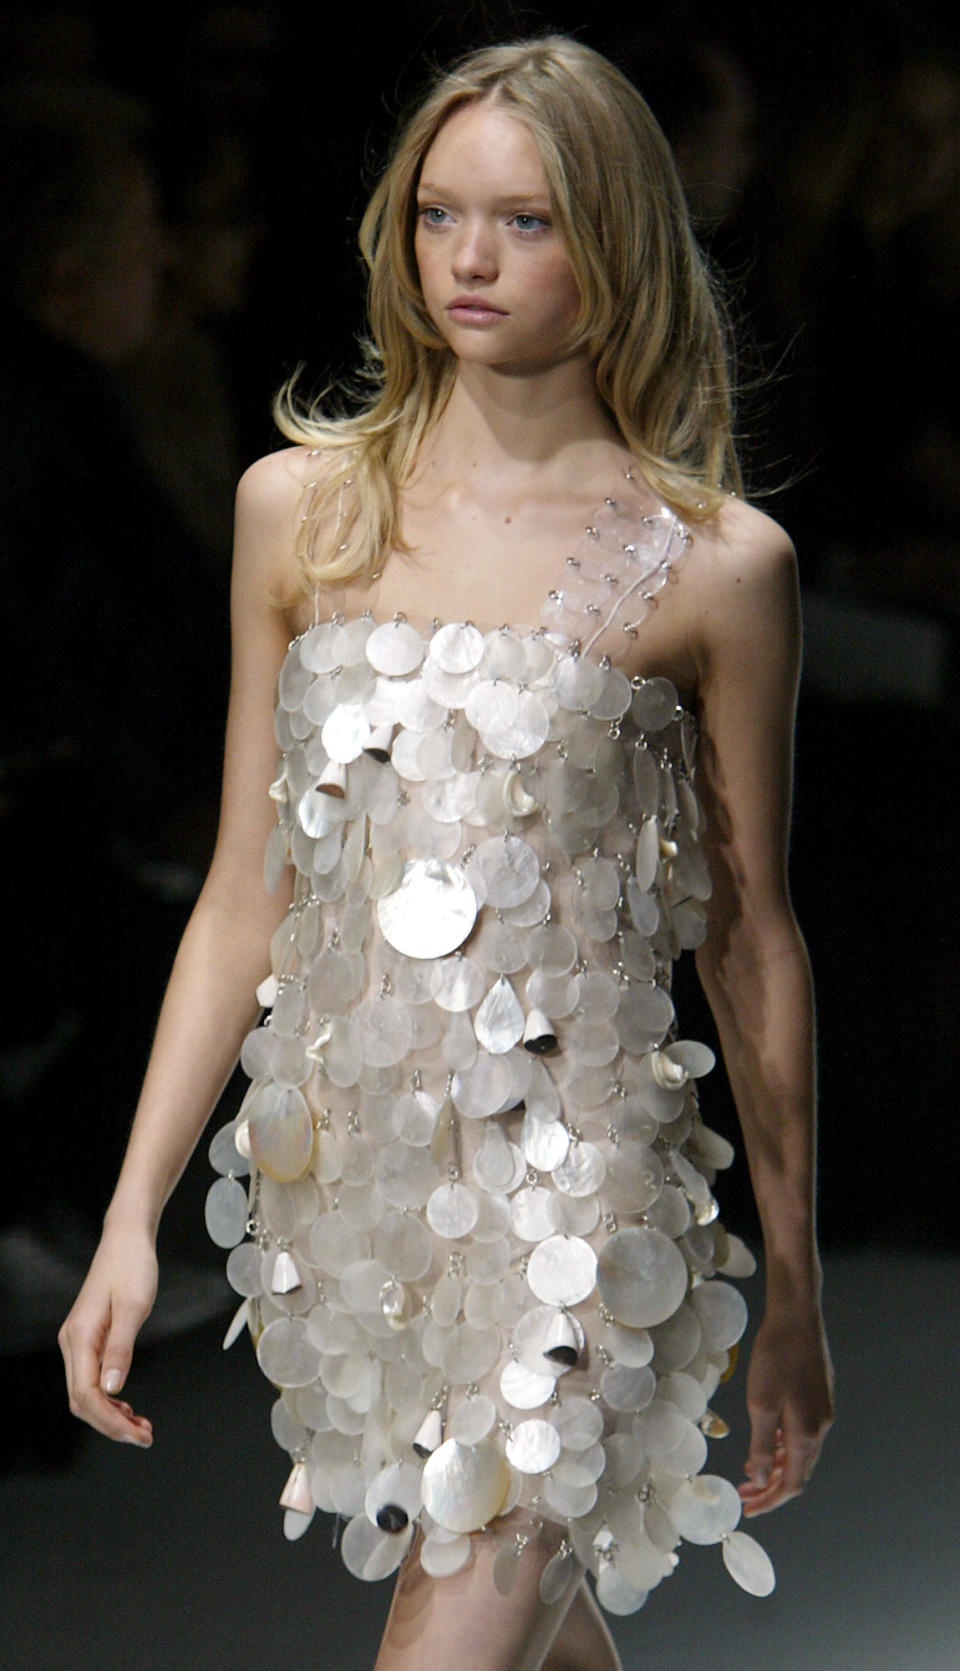 A model presents a creation designed by French fashion designer Rosemary Rodriguez for Rabanne's spring/summer 2005 ready-to-wear fashion collection, Oct. 9, 2004, in Paris.